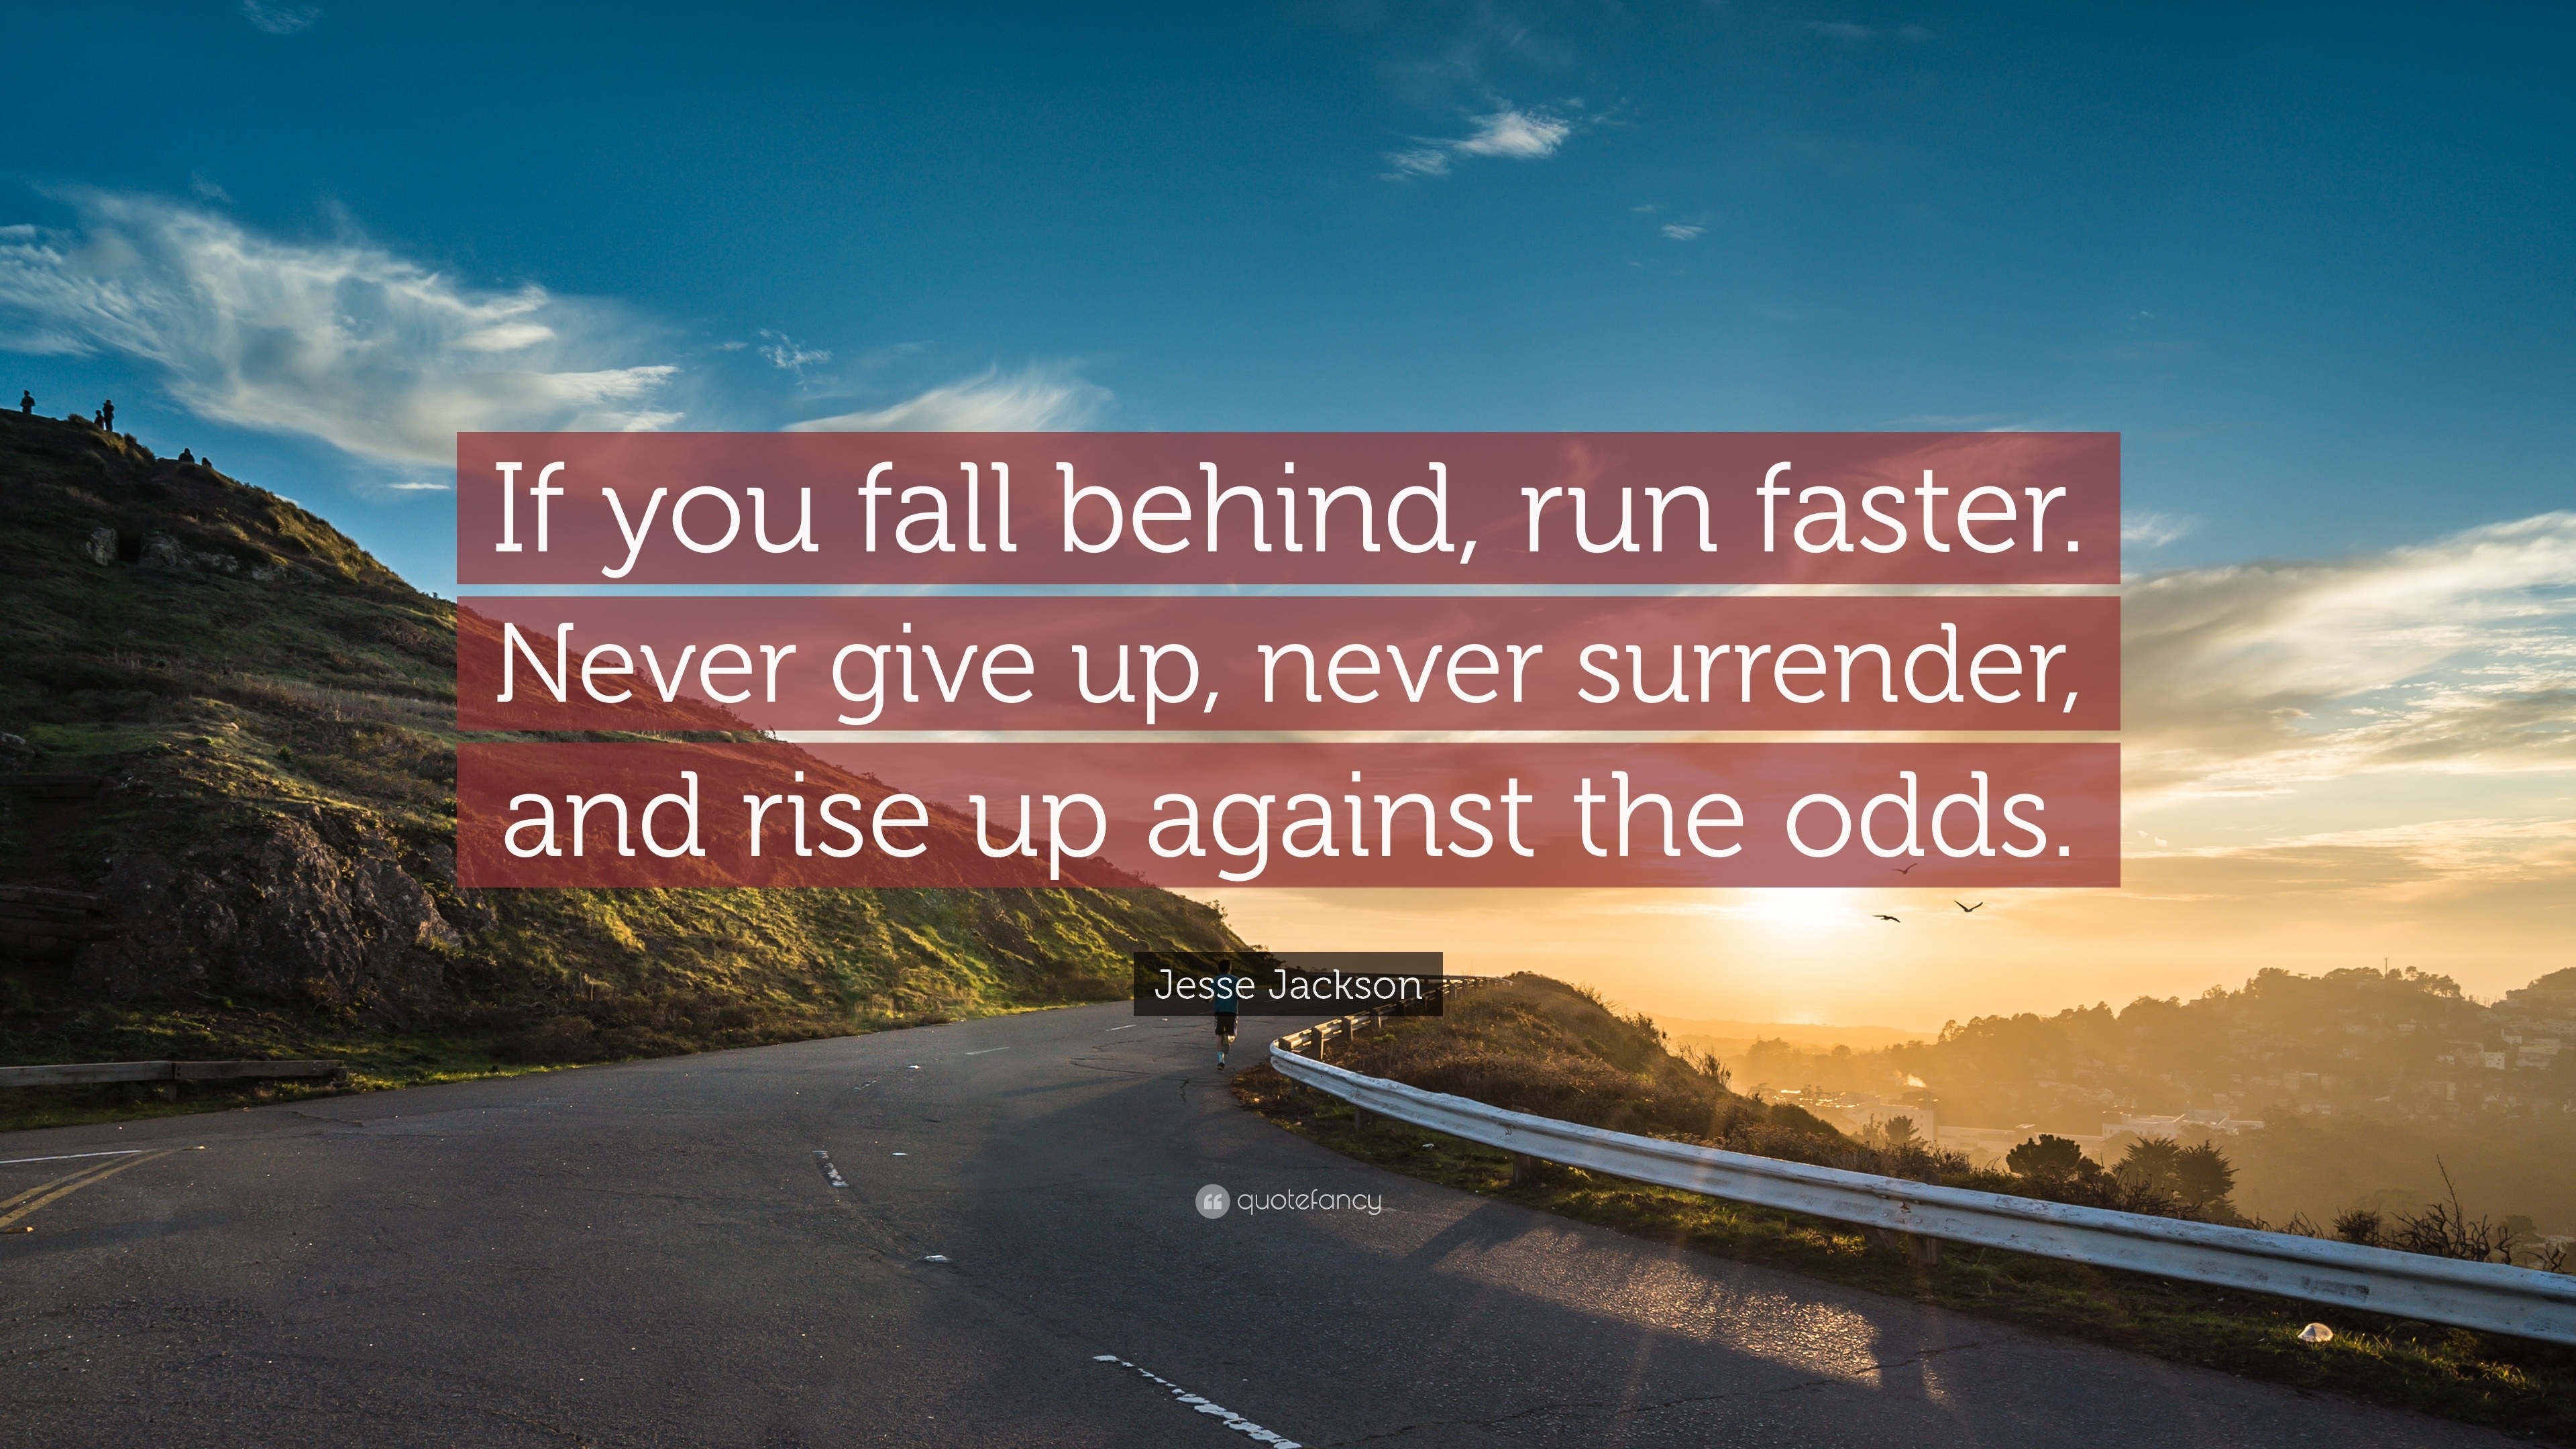 Jesse Jackson Quote: “If you fall behind, run faster. Never give